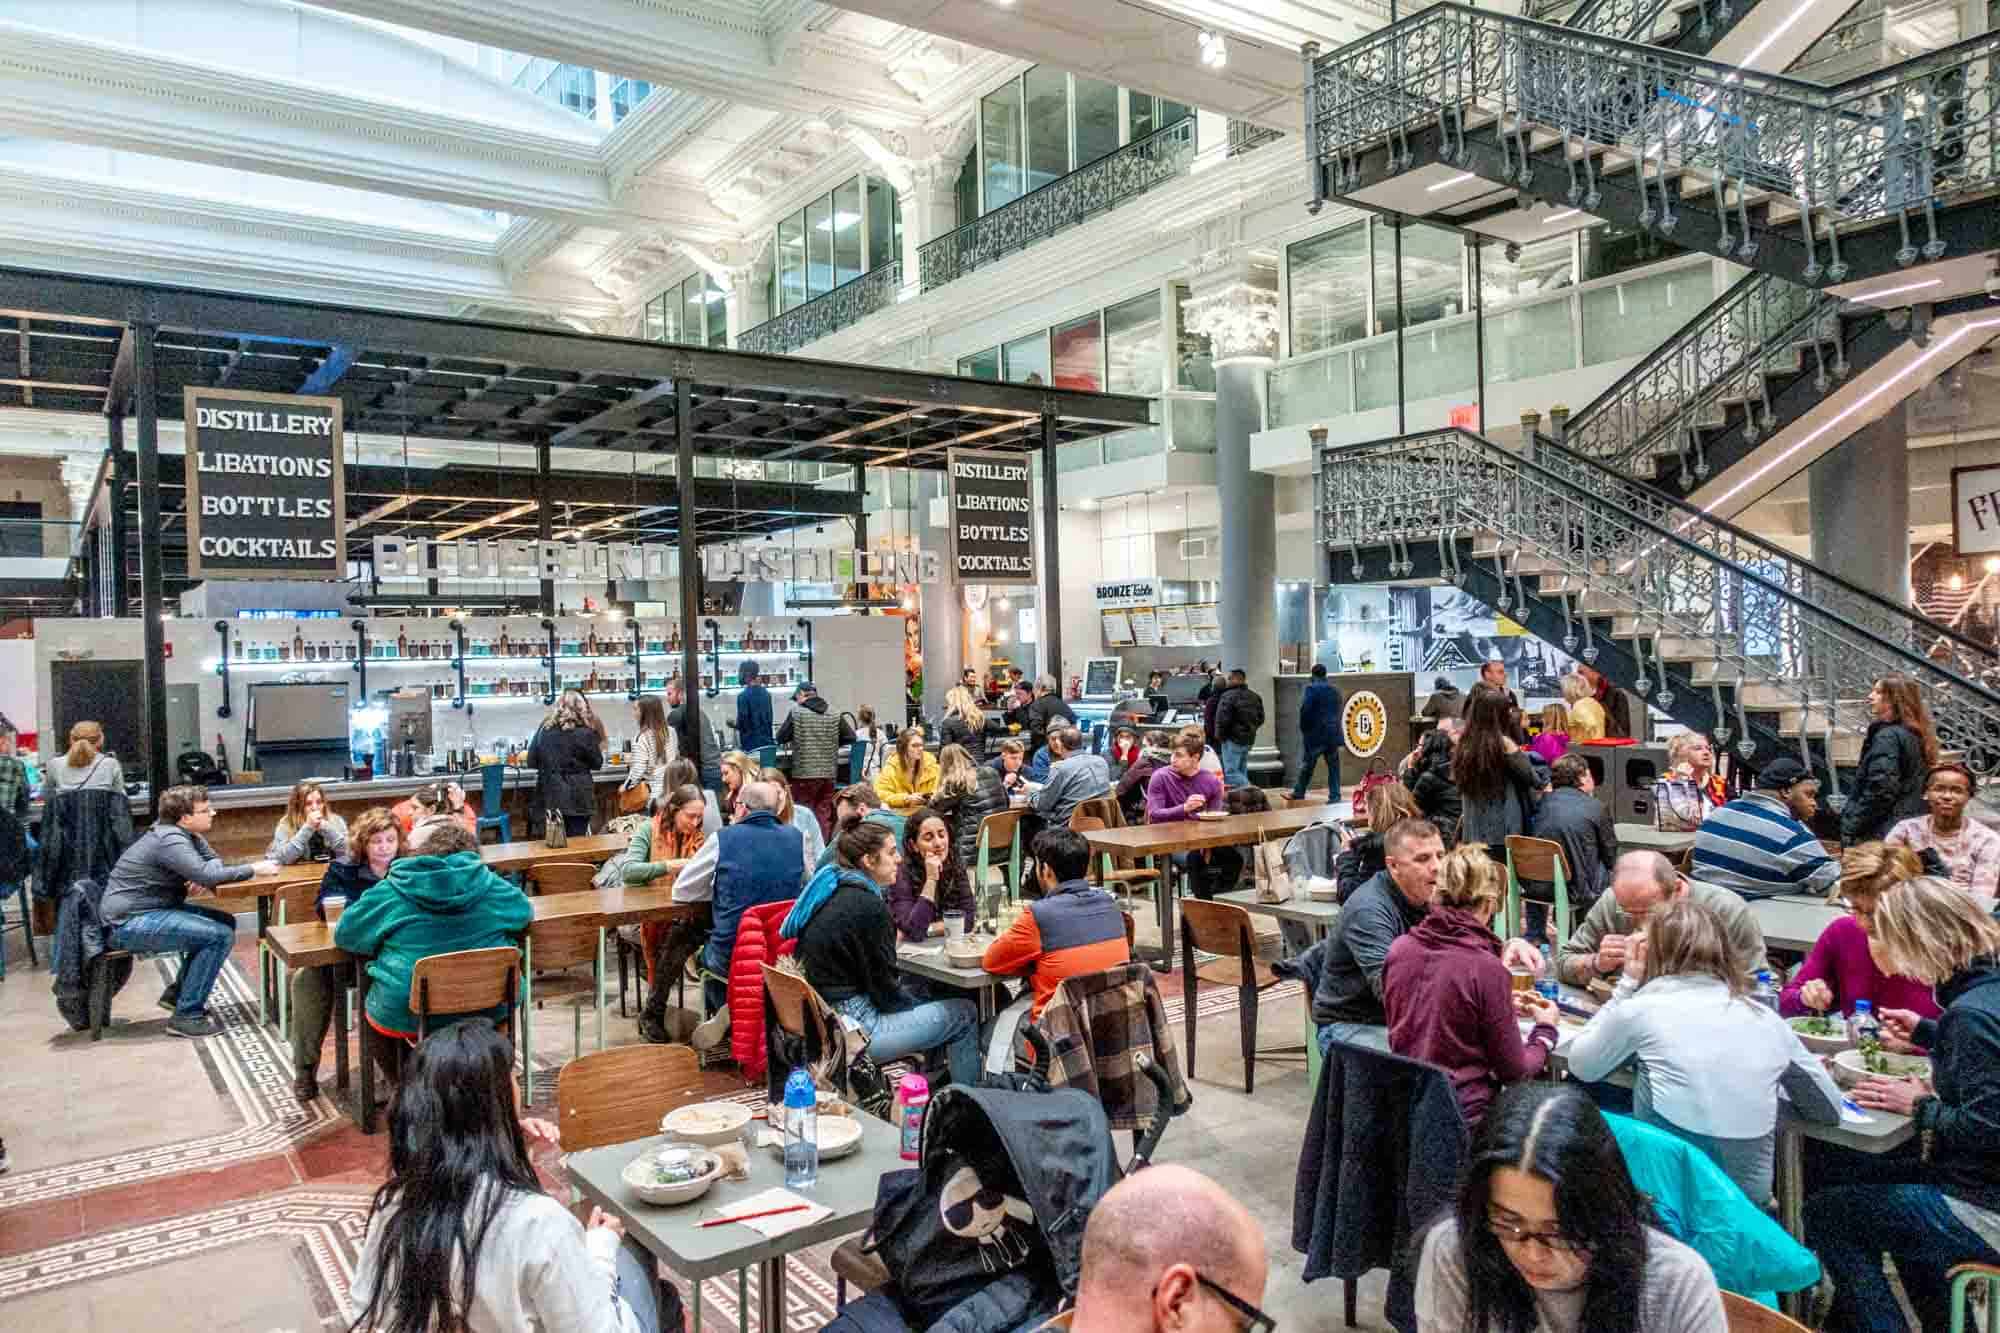 People eating at tables in a food hall